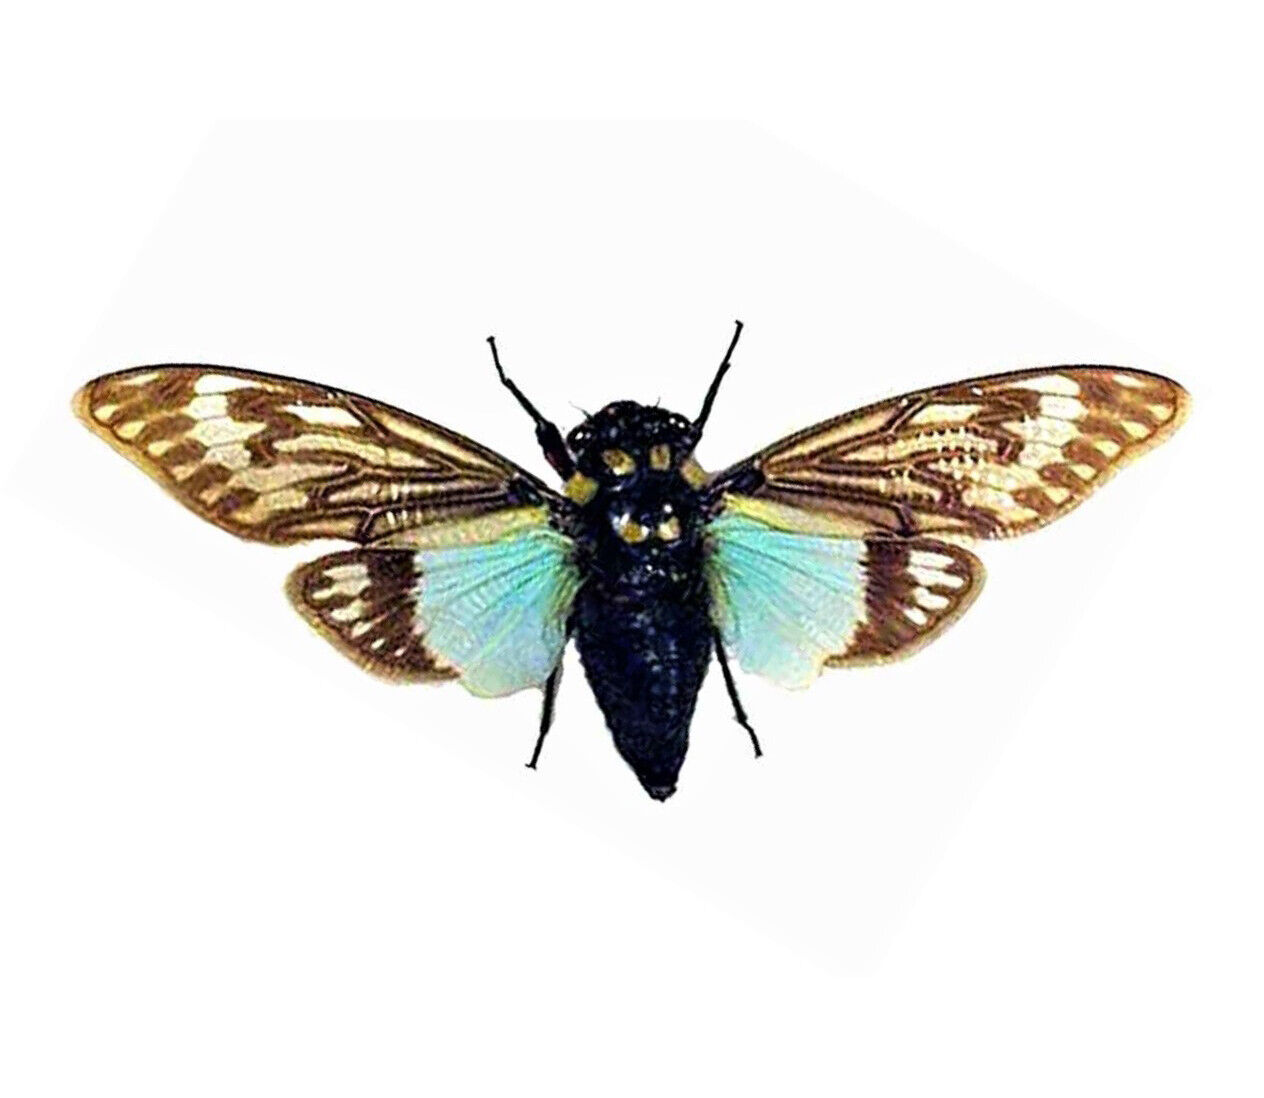 Tosena splendida ONE REAL BLUE CICADA SPREAD MOUNTED PAPERED PACKAGED